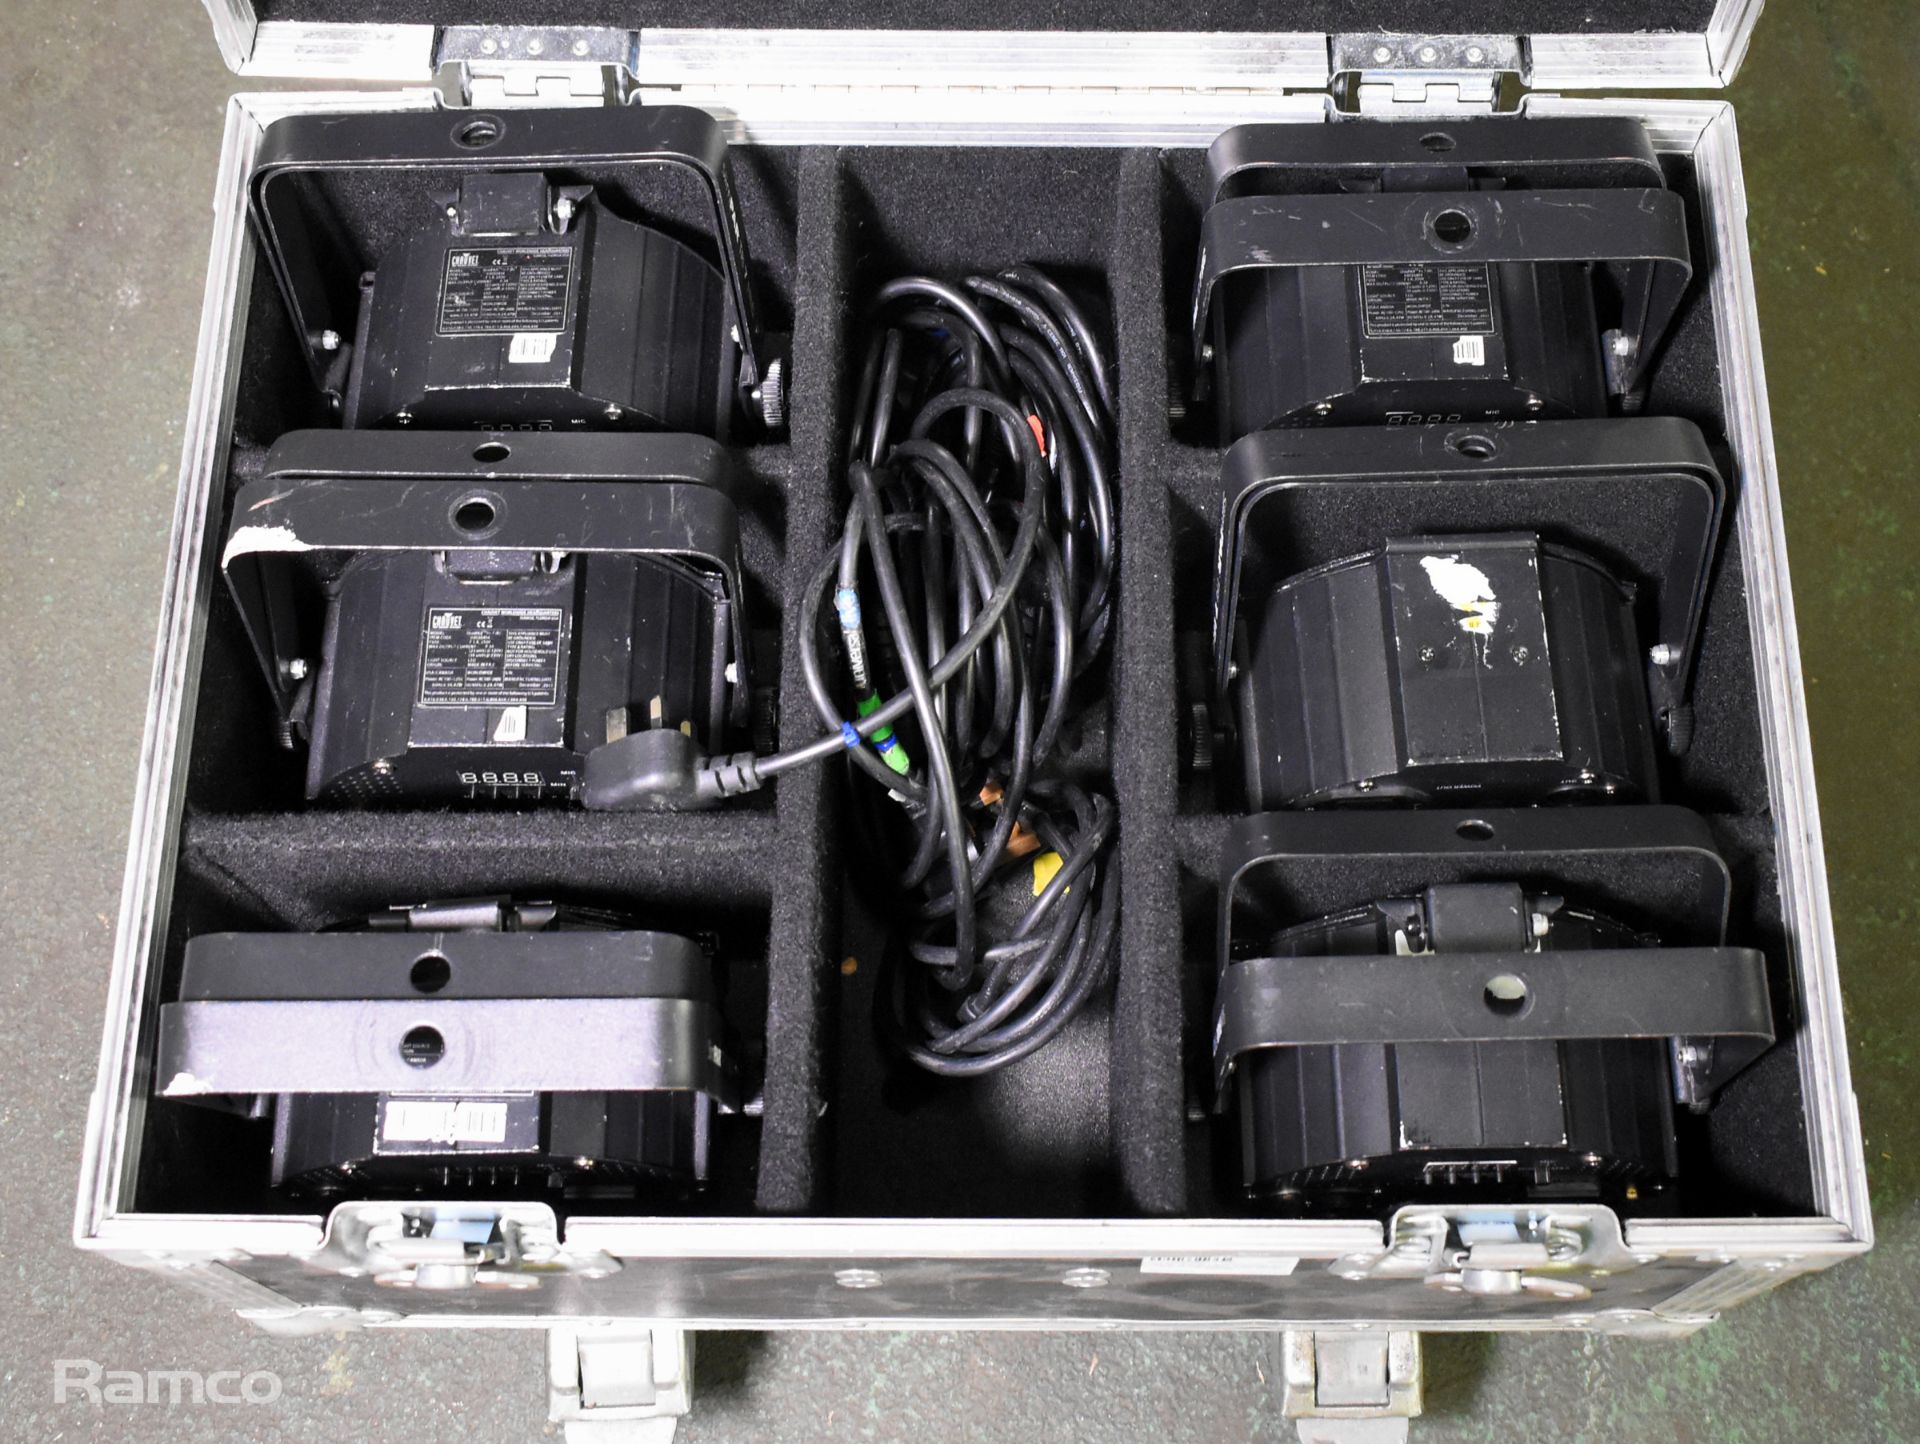 6x Chauvet LED SlimPar Tri7 IRC in flight case with power cables - Image 2 of 11